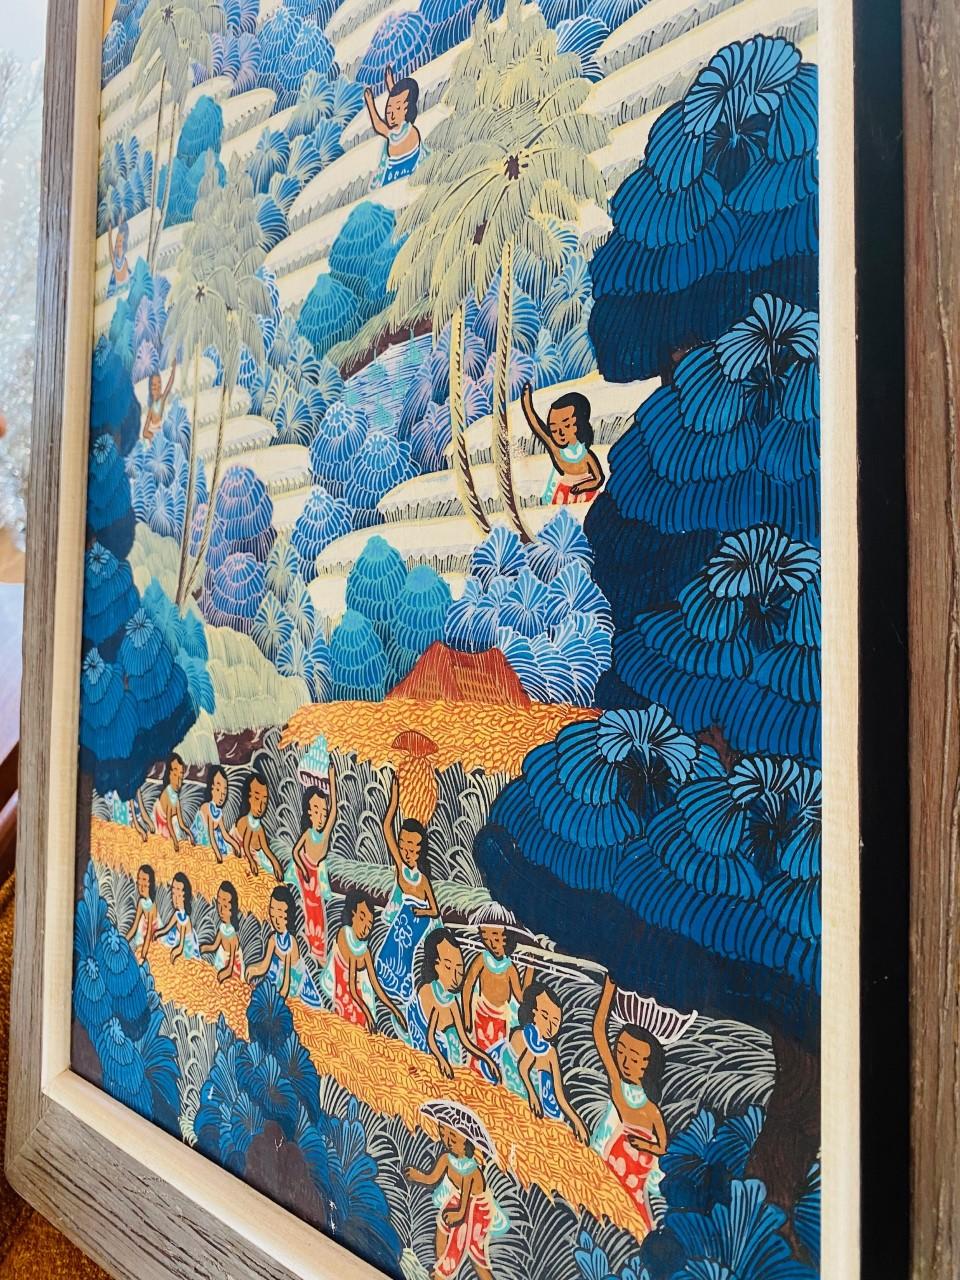 Beautiful original vintage painting signed by Kt. Teker depicting life in Penestanan. This beautiful depiction of Penestanan in Bali, brings out to life the colors and landscape. This painting depicts island women diligently working on a harvest.